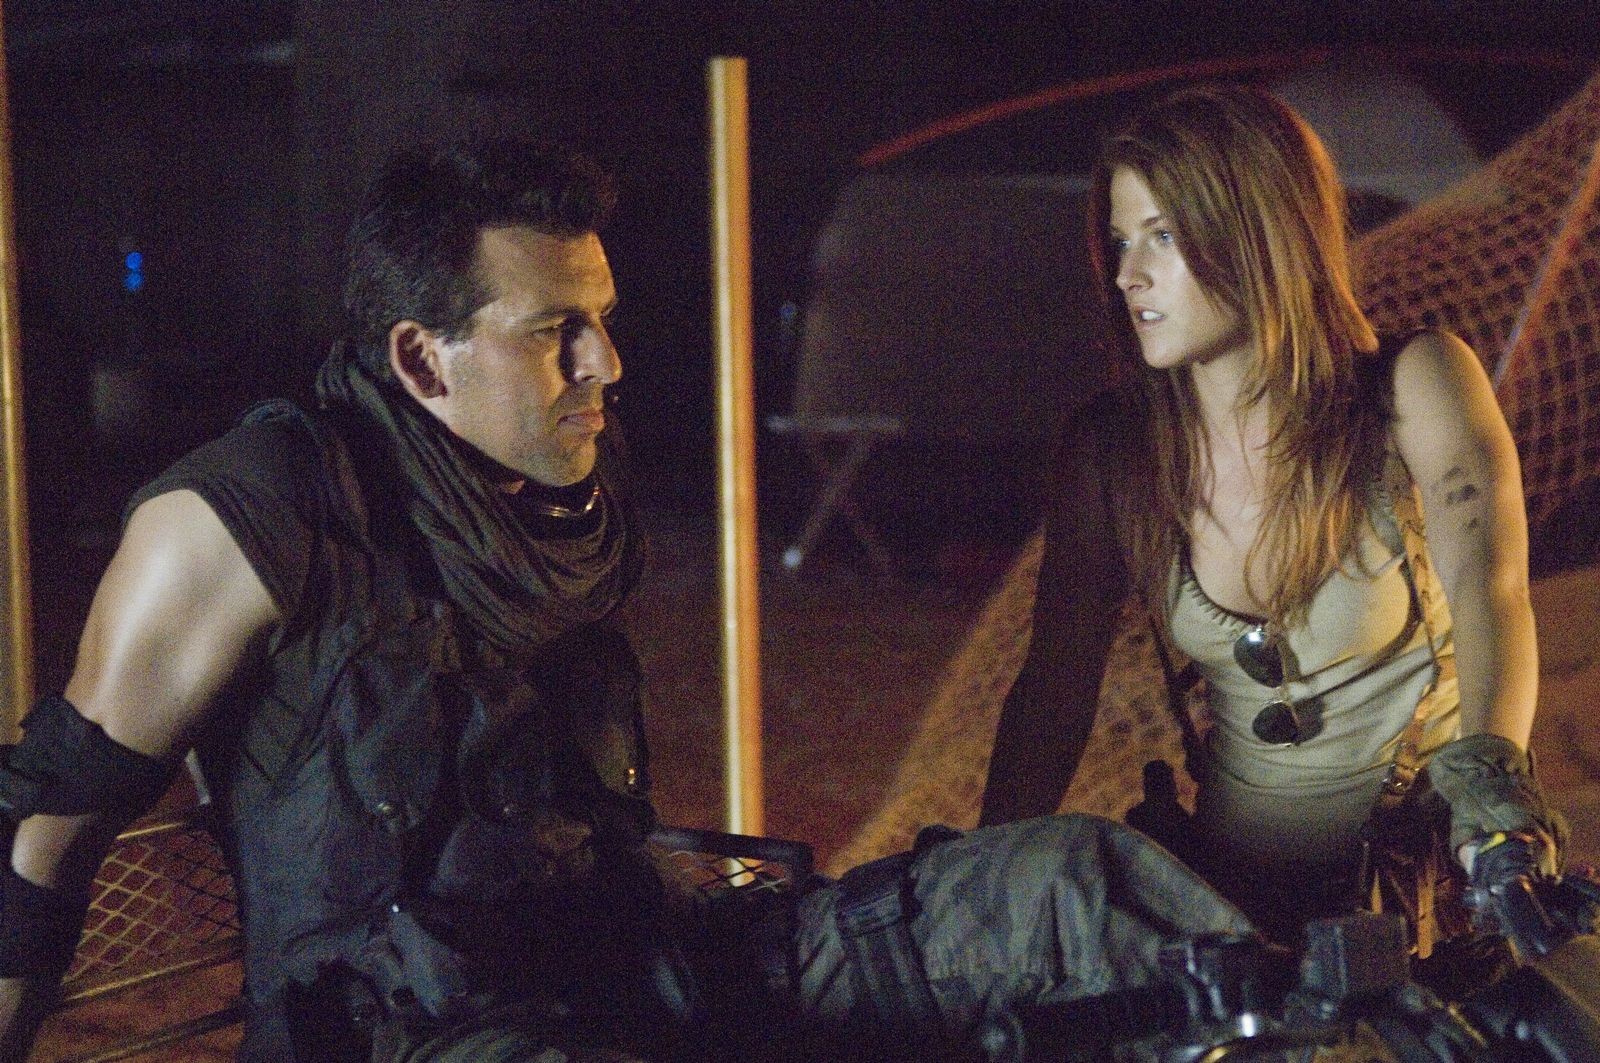 Ali Larter looks very hot wearing a military outfit in 'Resident Evil: Extinctio #75233933